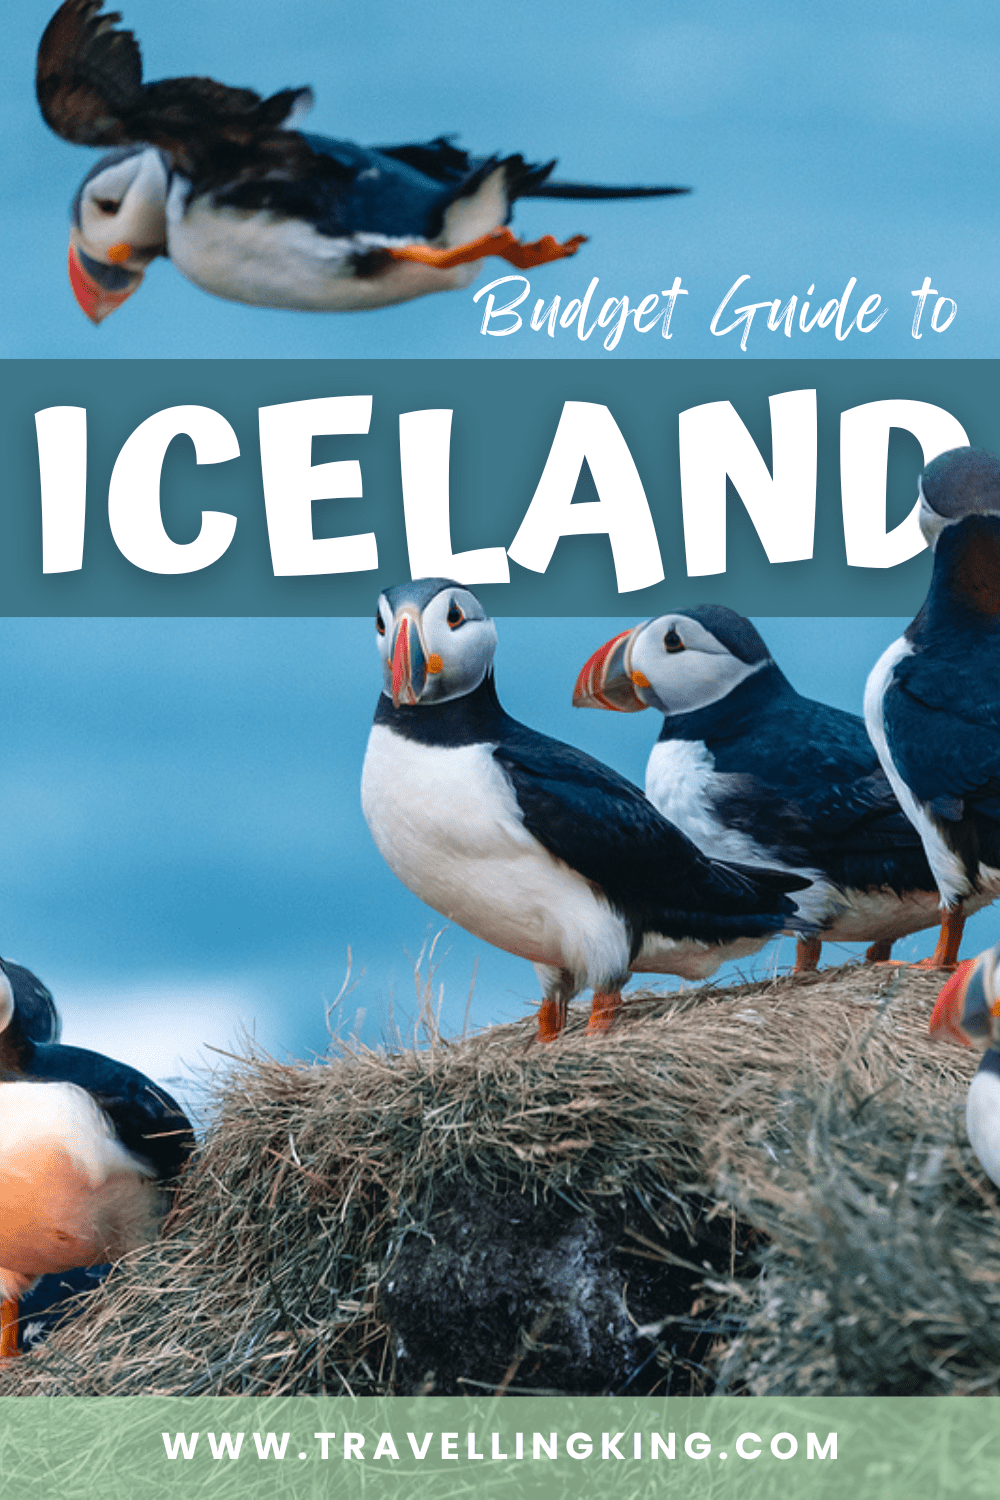 Budget Guide to Iceland